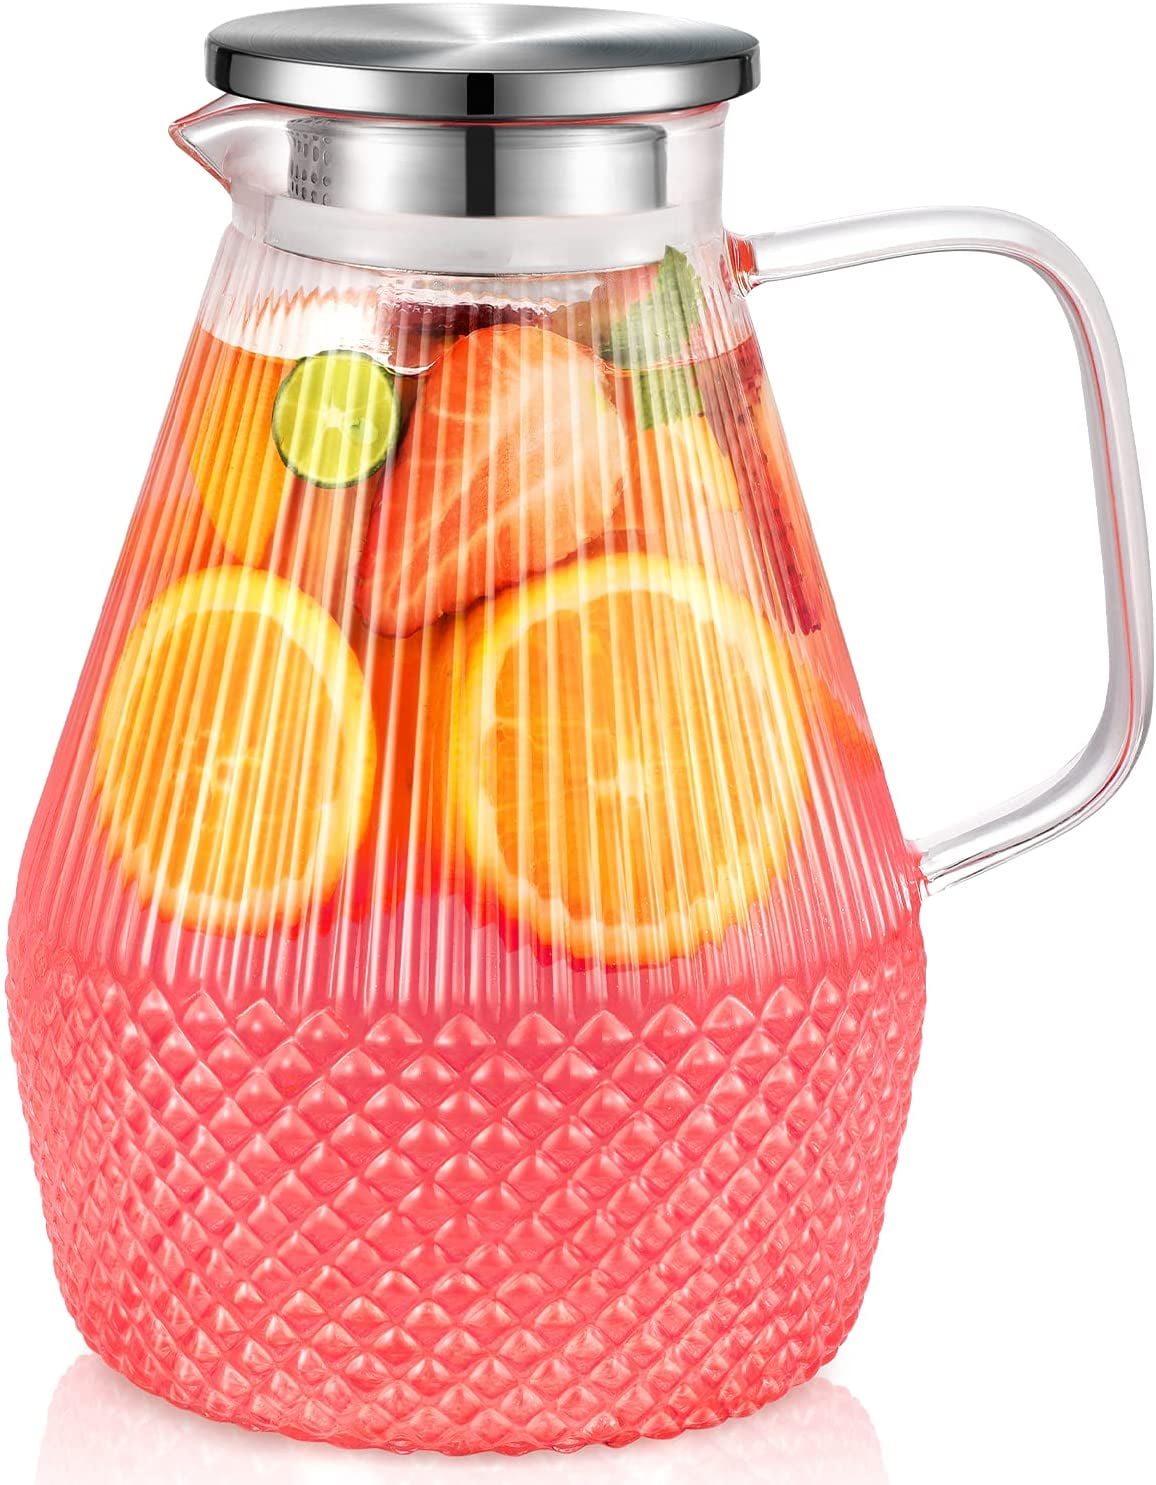 Glass Pitcher, 80oz Glass Pitcher with Lid and Spout, Large Glass Water  Pitcher for Juice, Lemonade, Hot&Cold Beverage, Iced Tea Pitcher for Fridge,  Heat Resistant Glass Carafe with Brush 